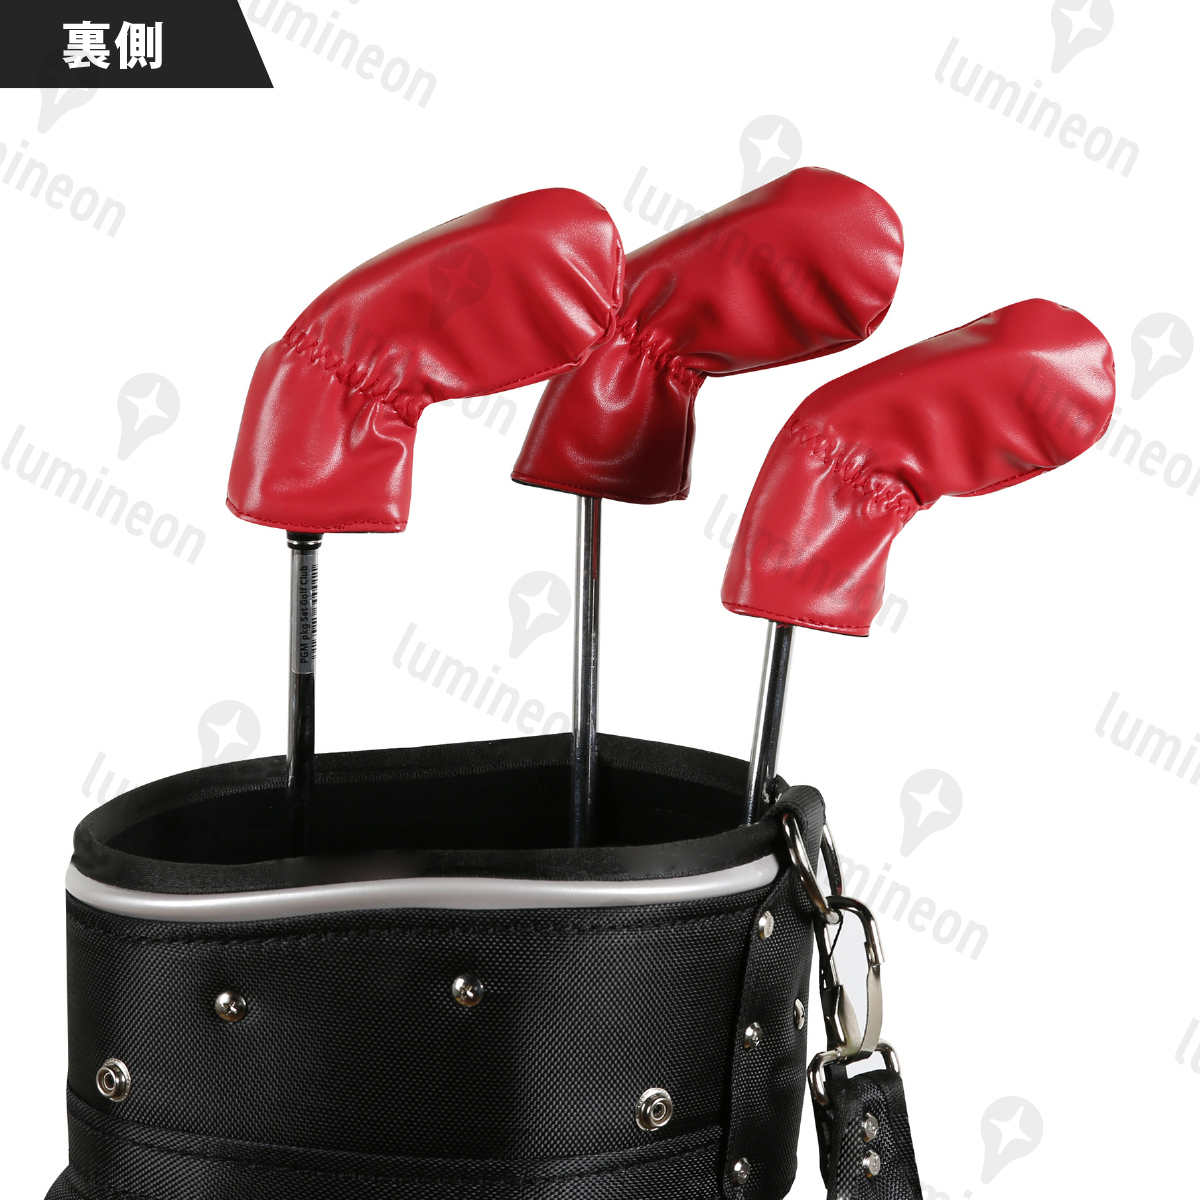  iron cover head 9 point set Golf kla bread red high class leather reverse side boa embroidery entering water-repellent water-proof hood count attaching simple g082c 3